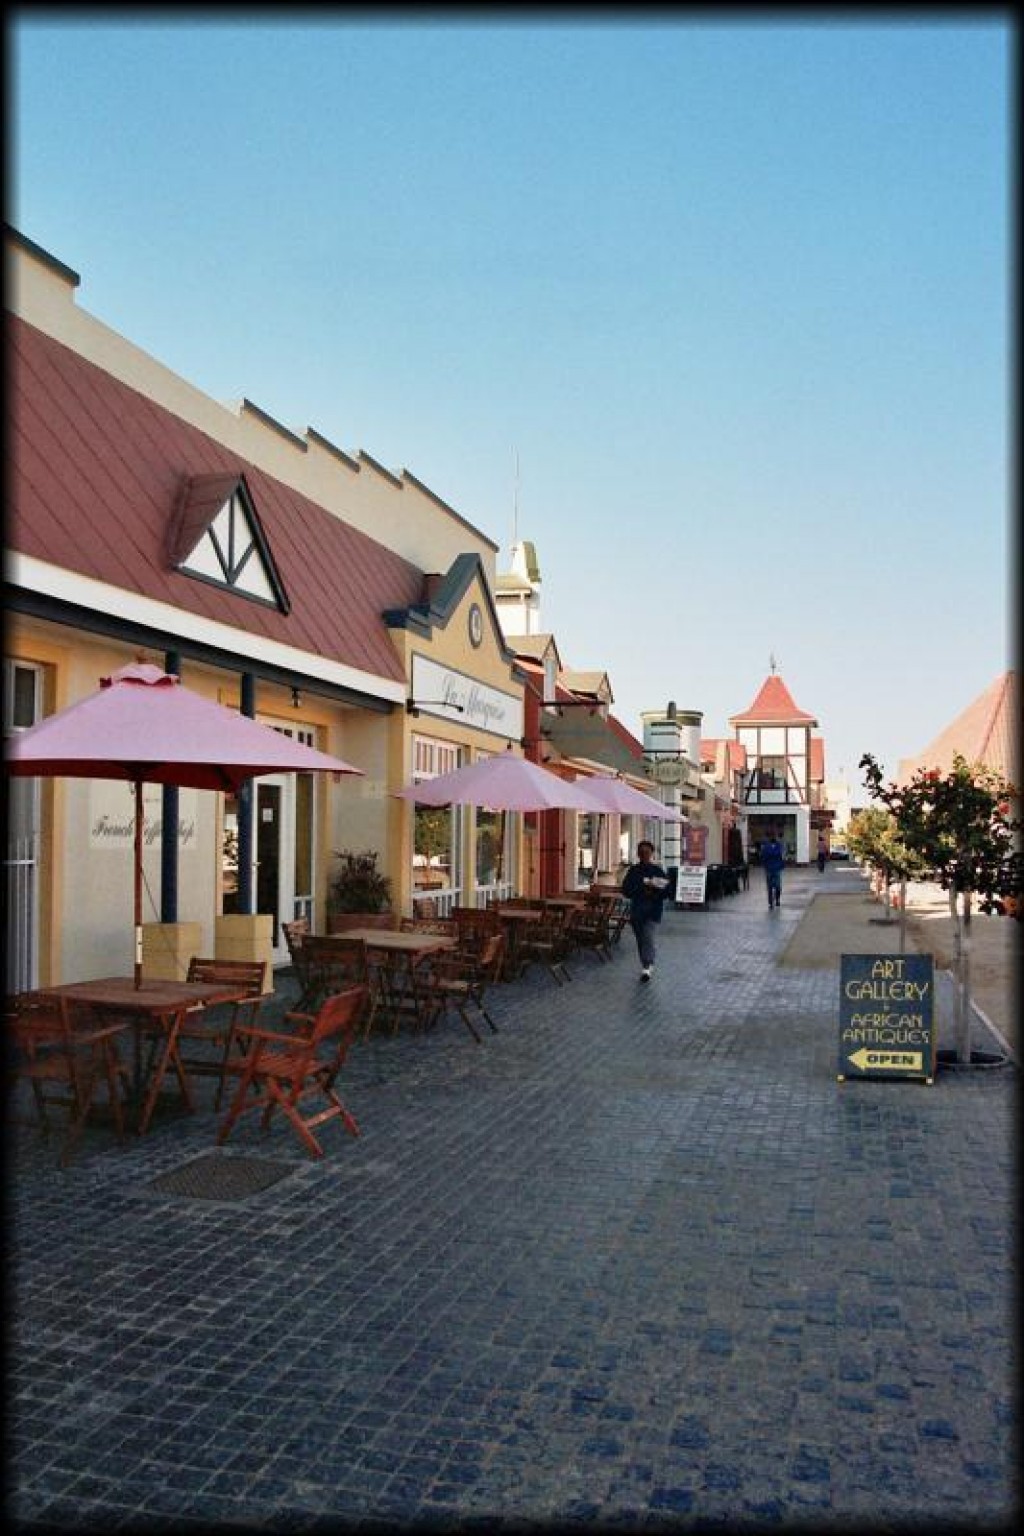 Windhoek was a German territory as recently as the 90s.